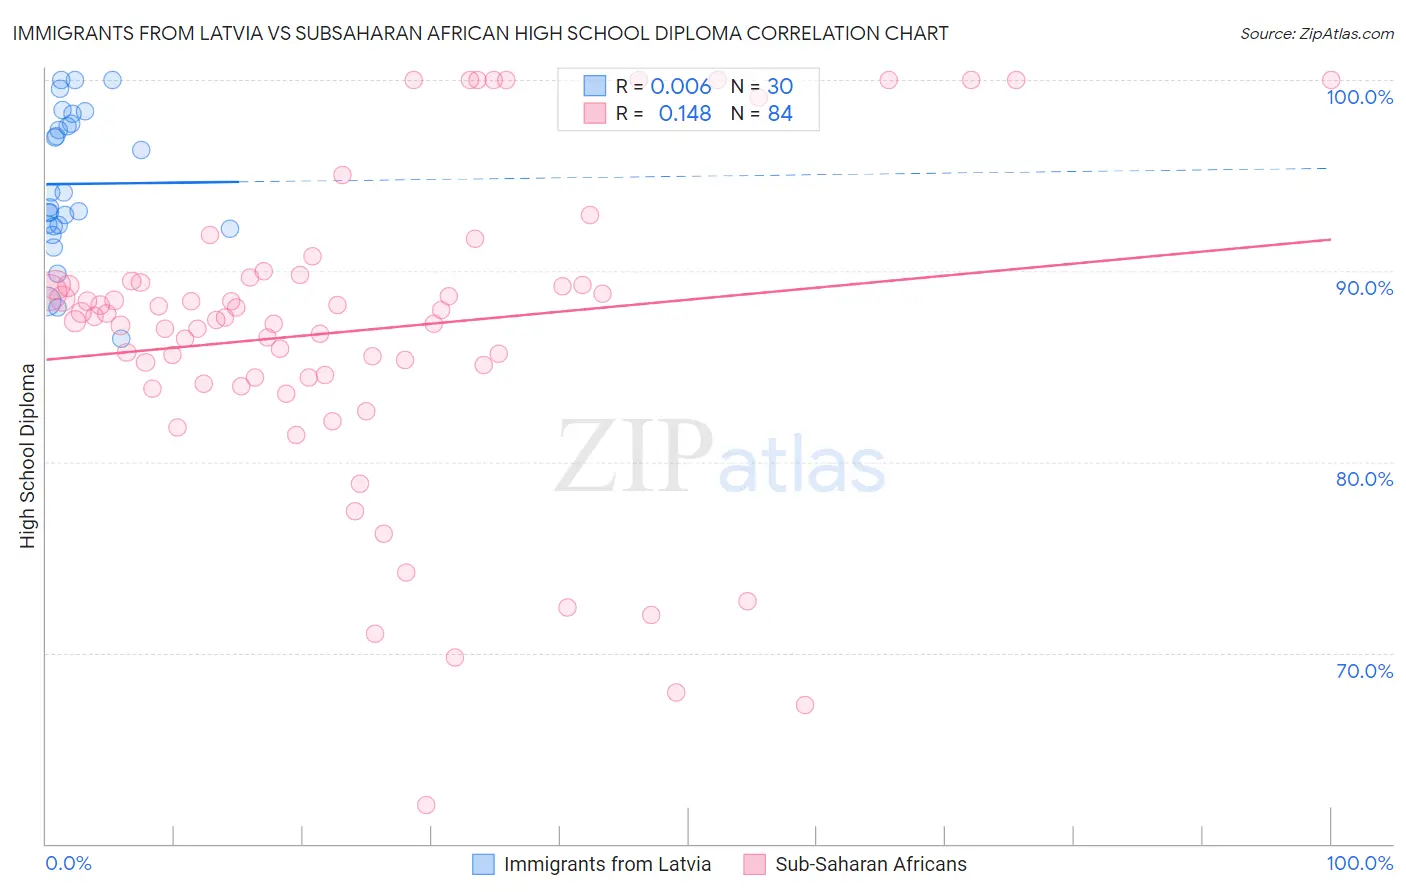 Immigrants from Latvia vs Subsaharan African High School Diploma